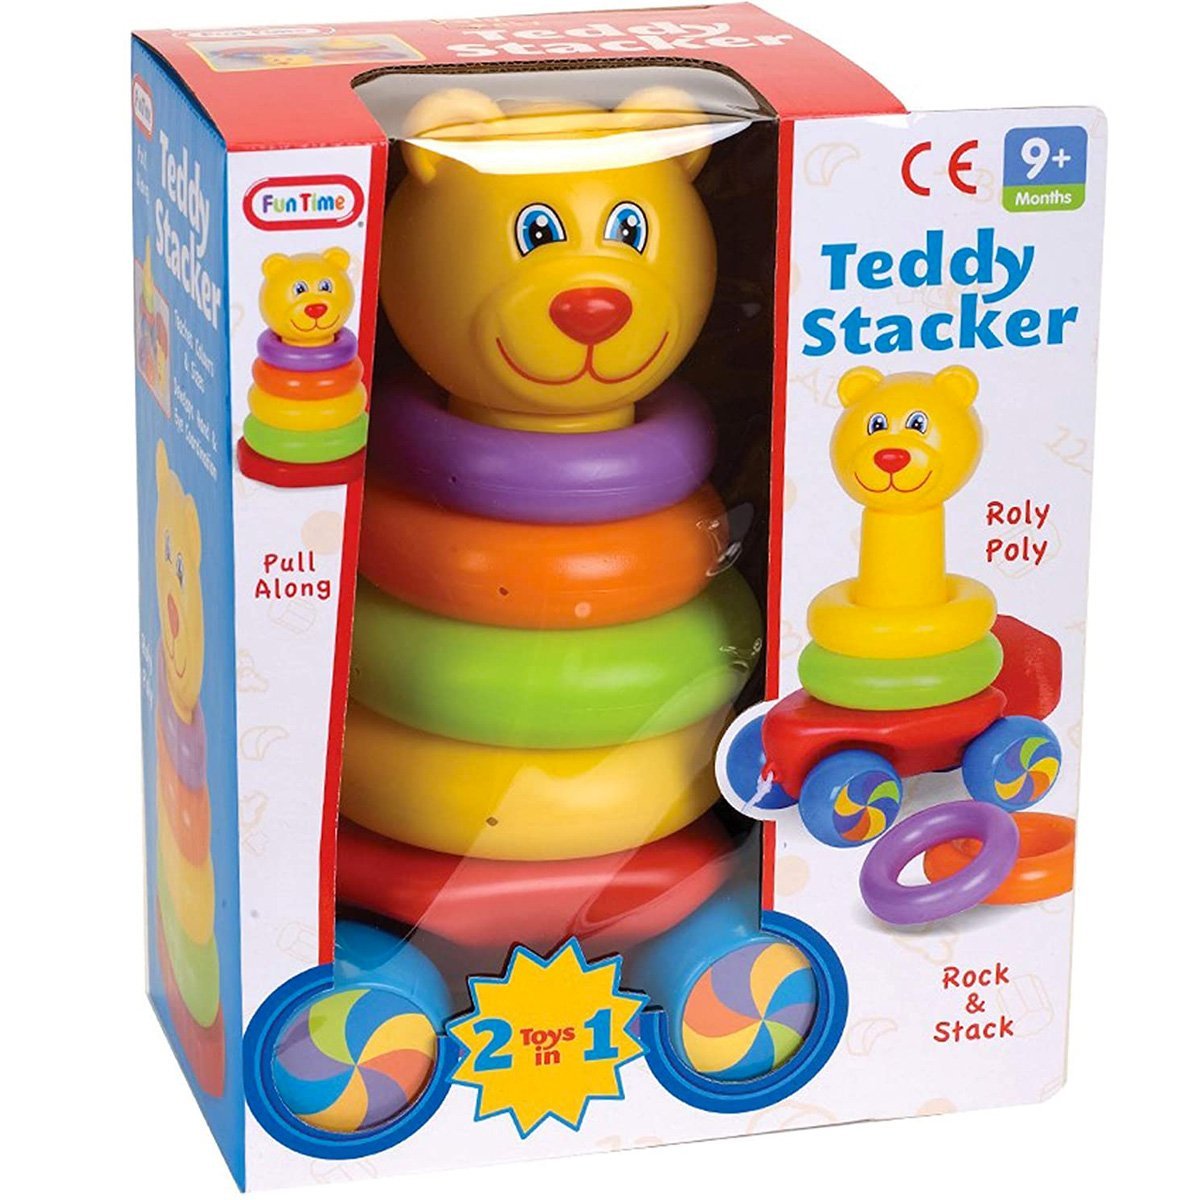 Fun Time Pull Along Stacking Teddy - Nesh Kids Store